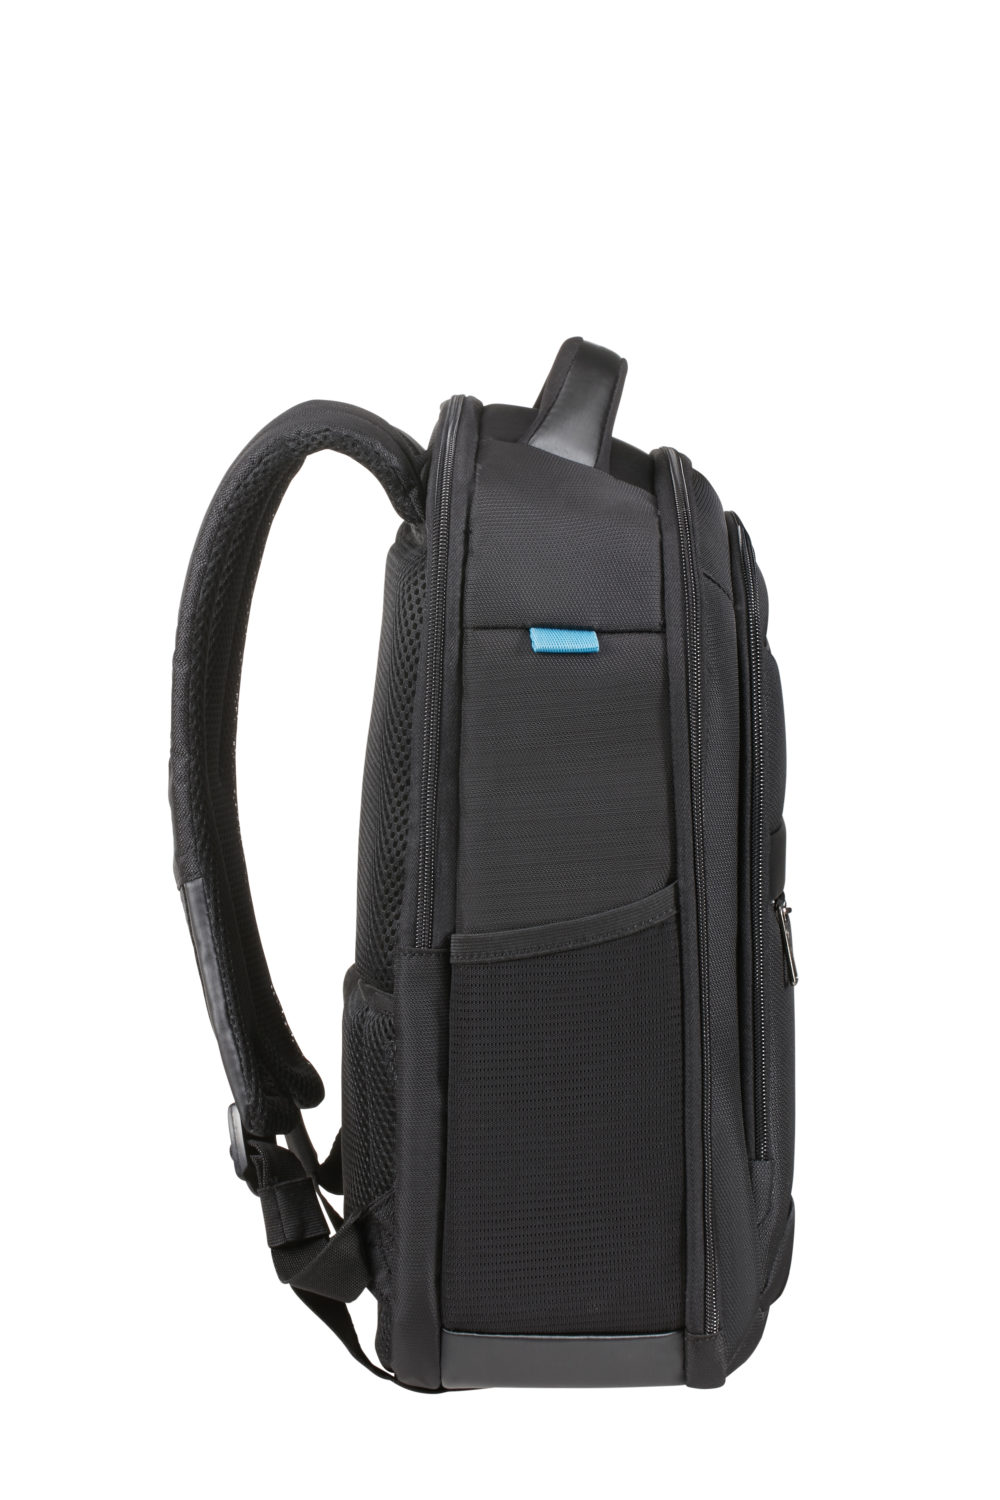 VECTURA EVO LAPT.BACKPACK 14.1